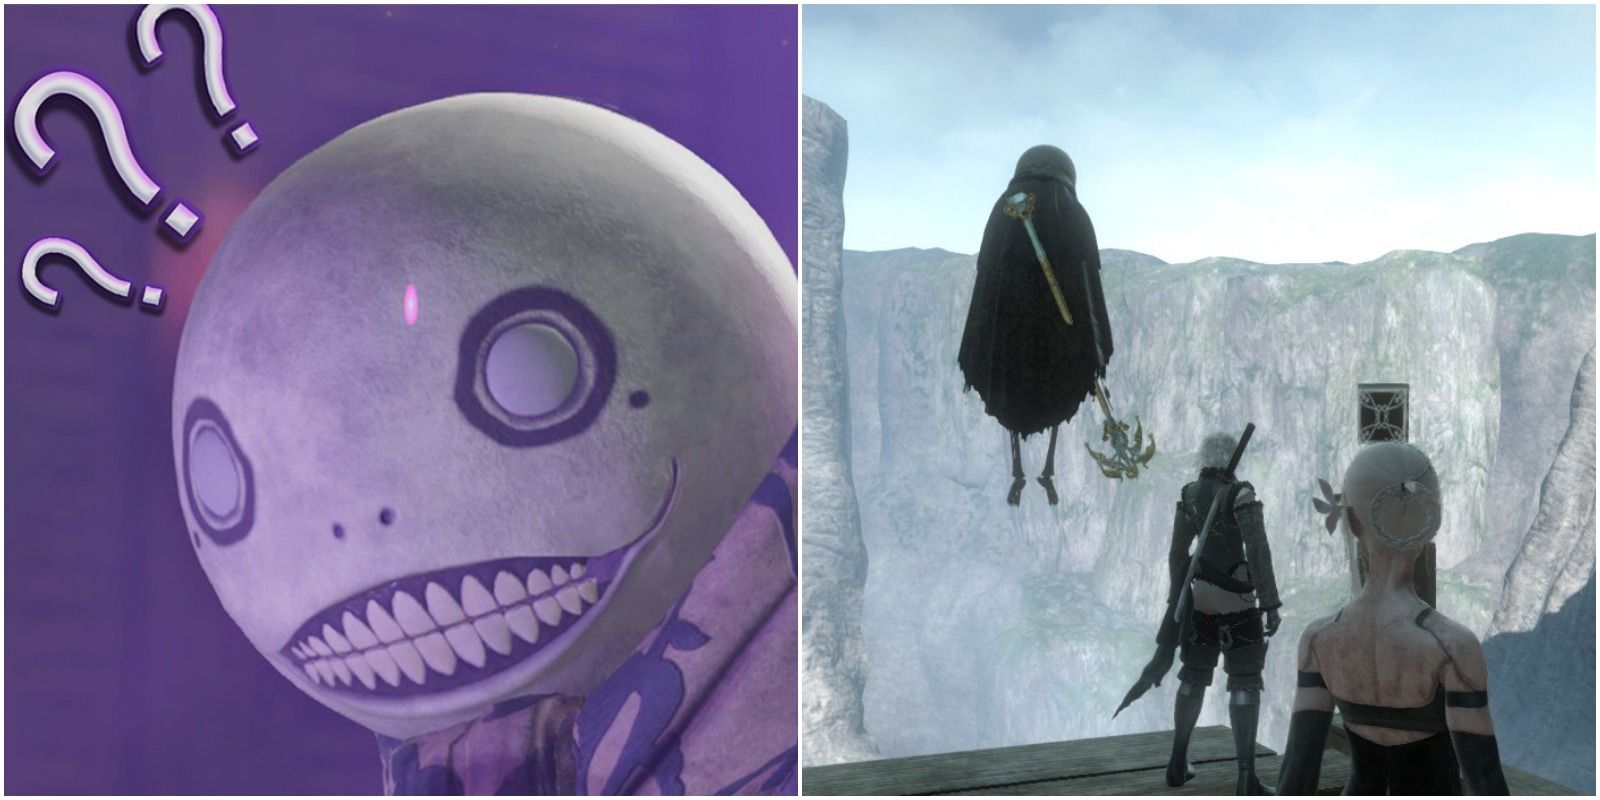 Nier: Automata Questions That Nier Replicant Can Answer